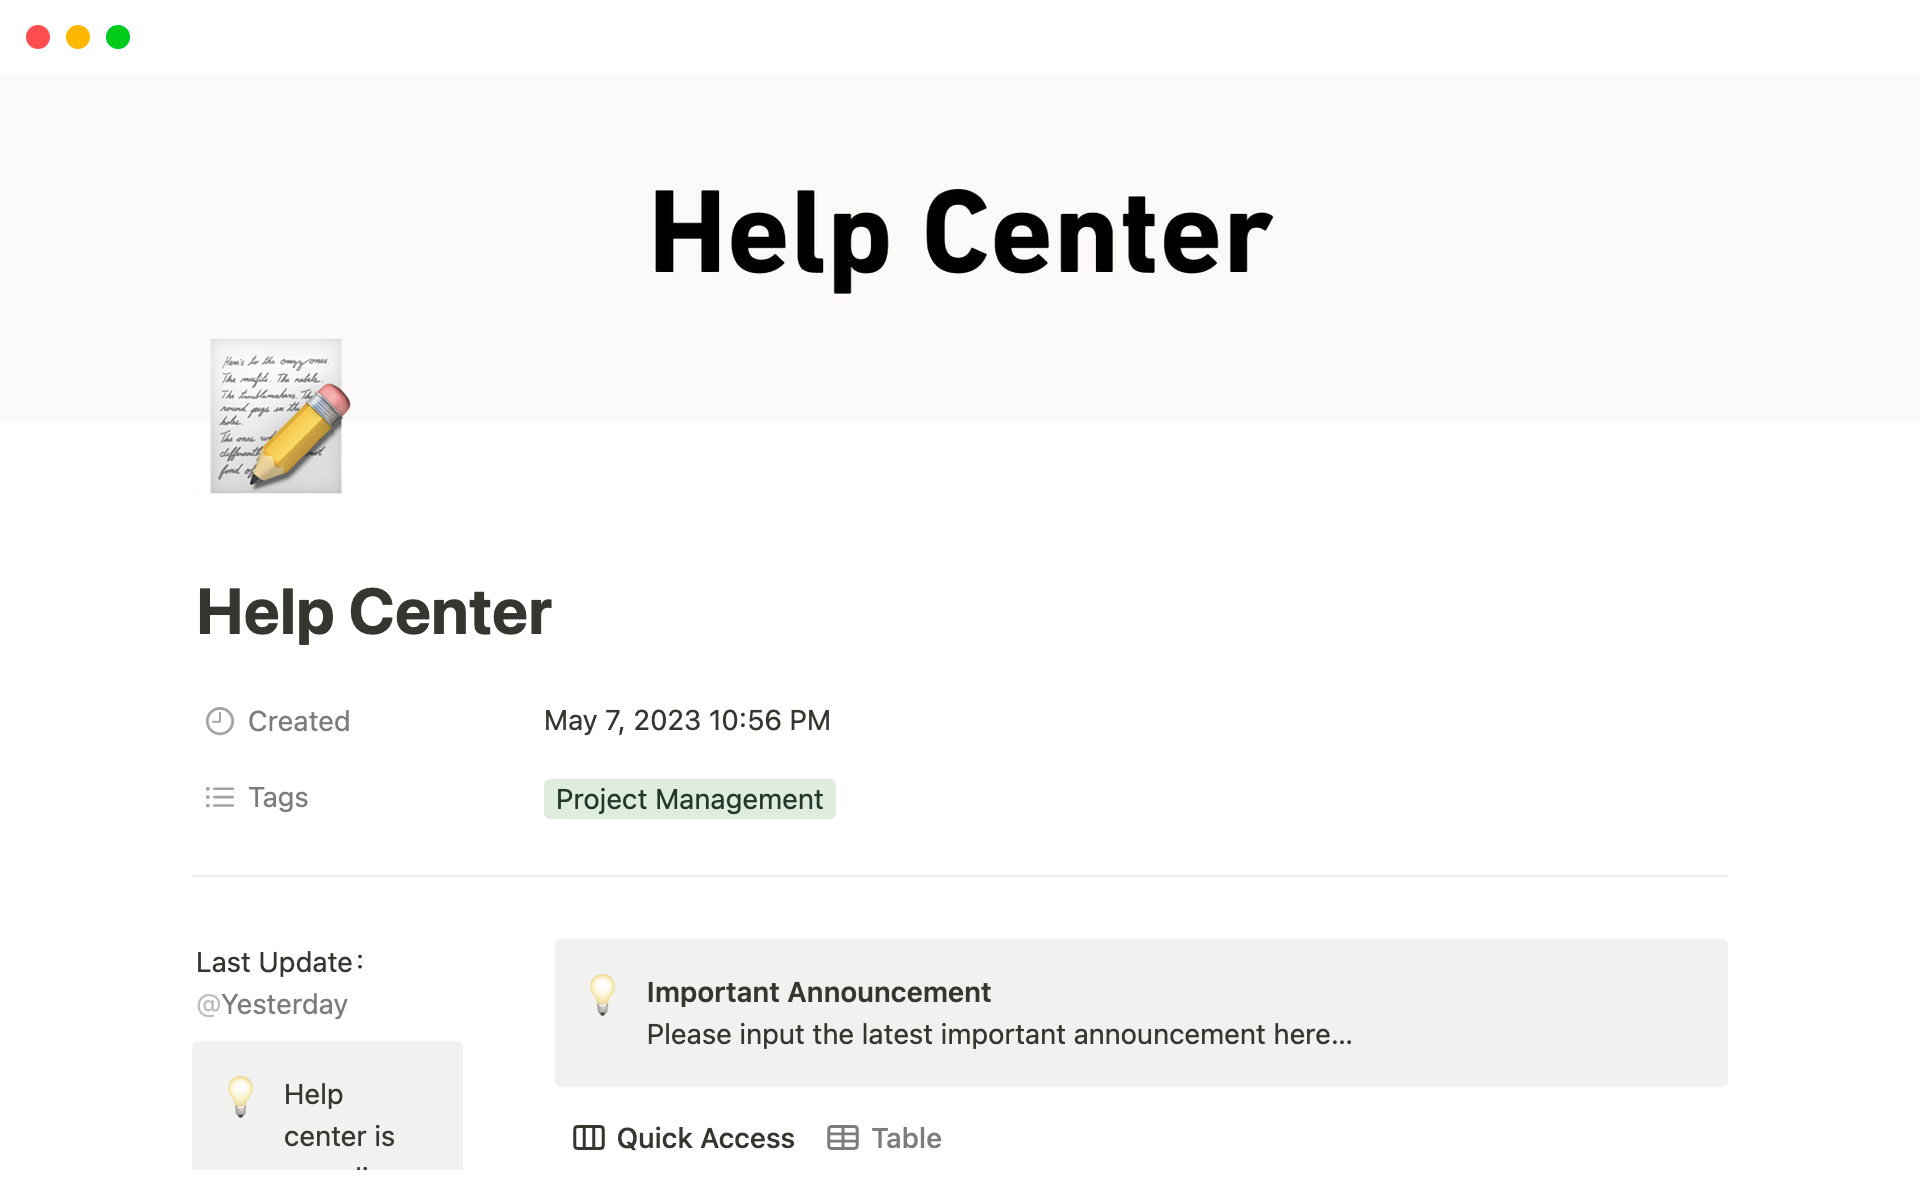 Help center is an online platform that provides help and support to users. It aims to answer users' questions and doubts encountered in the process of using products or services, and provide relevant operational guidance and usage tips.